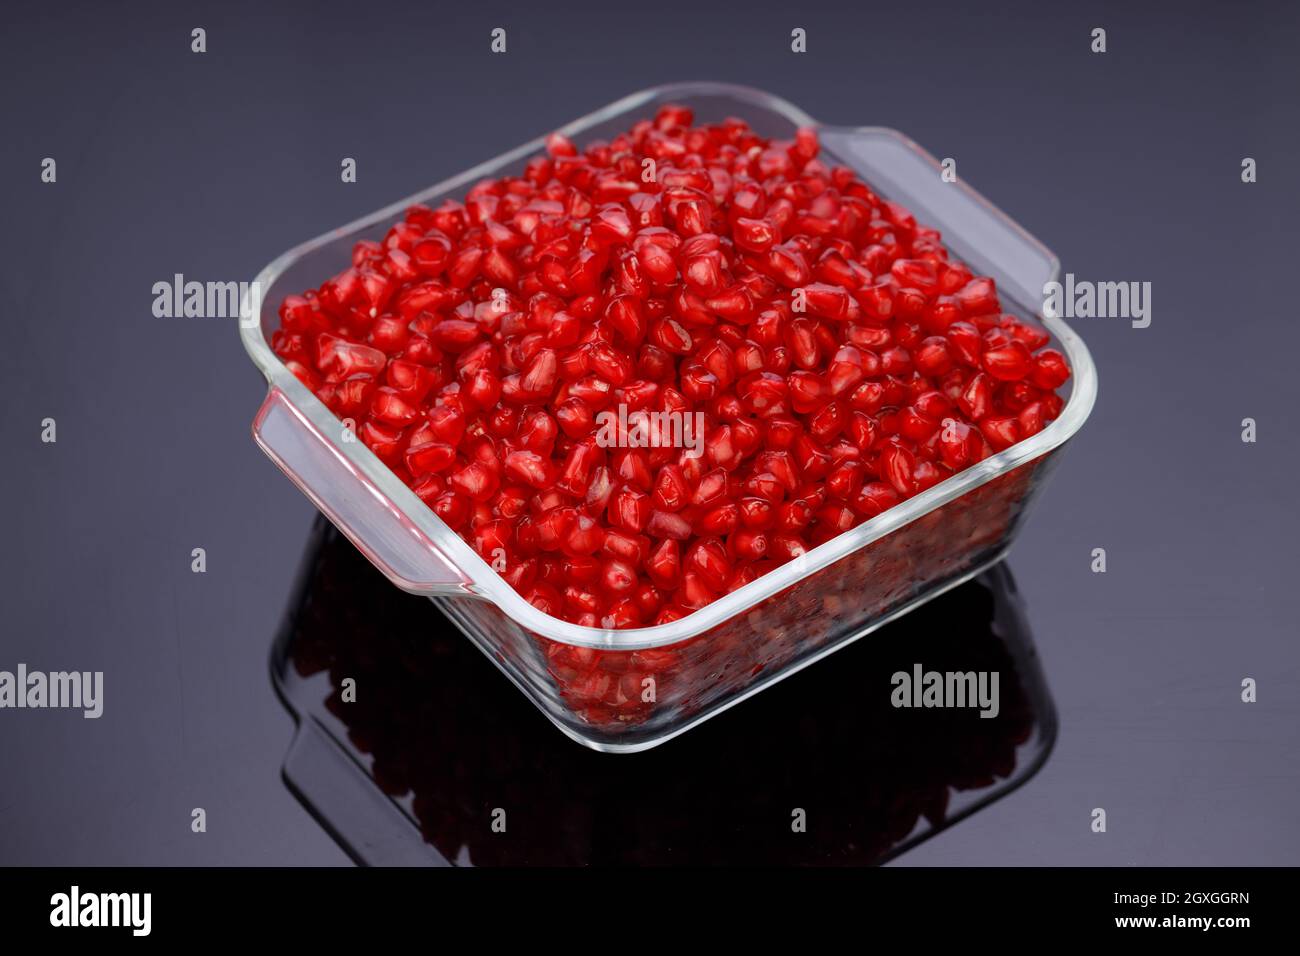 Fresh Pomegranate seed arranged in a square glass container on black background, isolated. Stock Photo